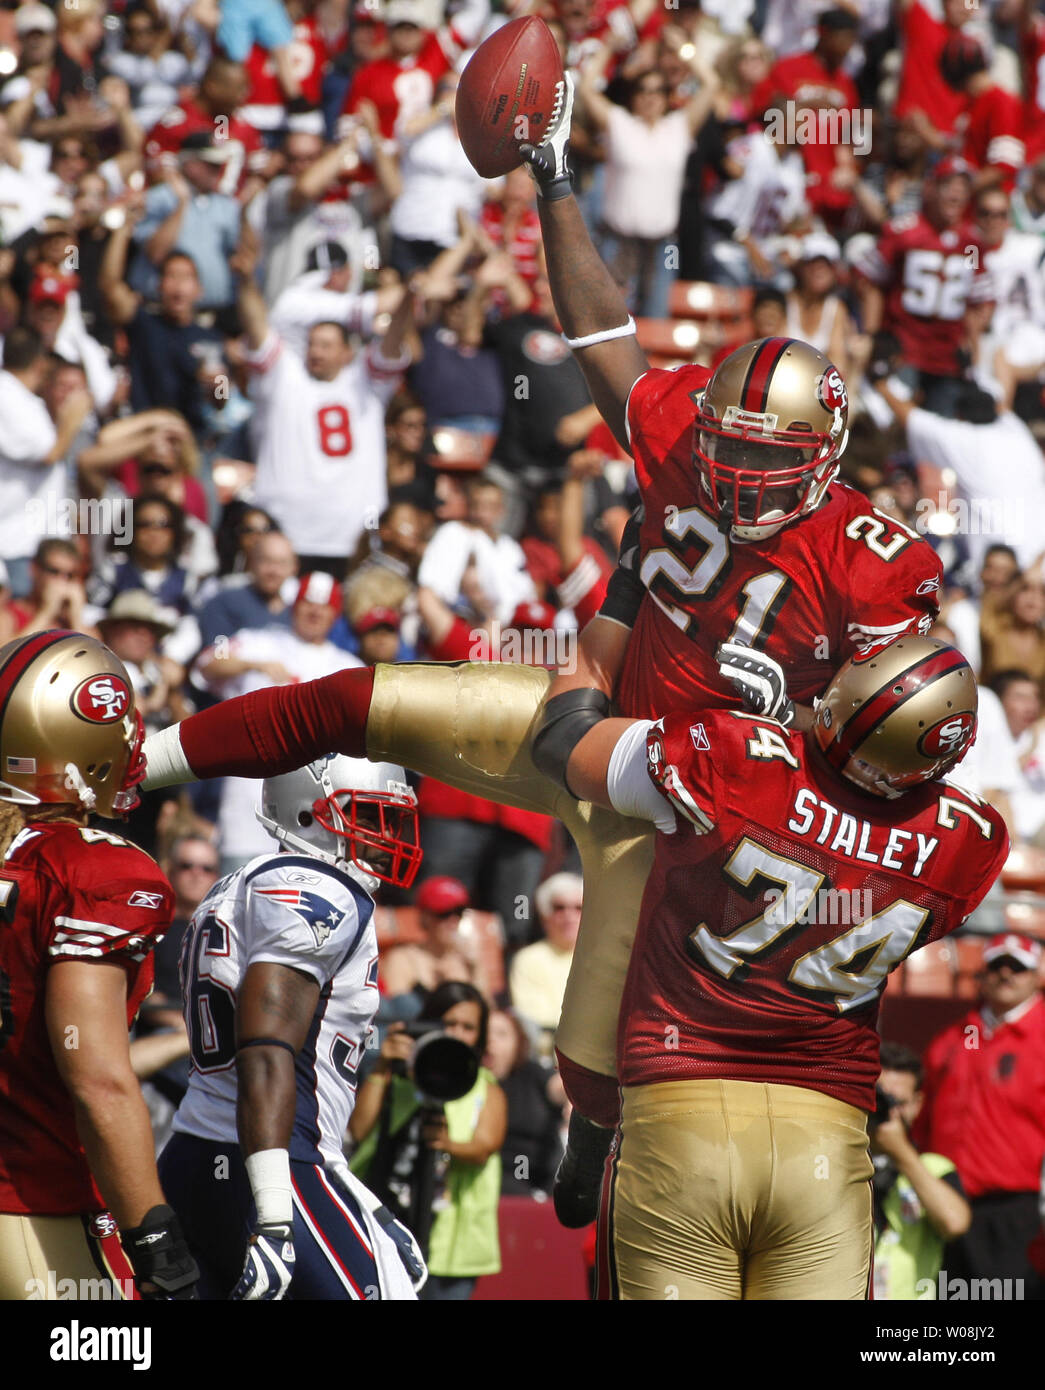 Ex-49ers Frank Gore & Joe Staley Offer To Buy Tickets For All 49ers Fans In  Hopes Of Taking Over SoFi Stadium